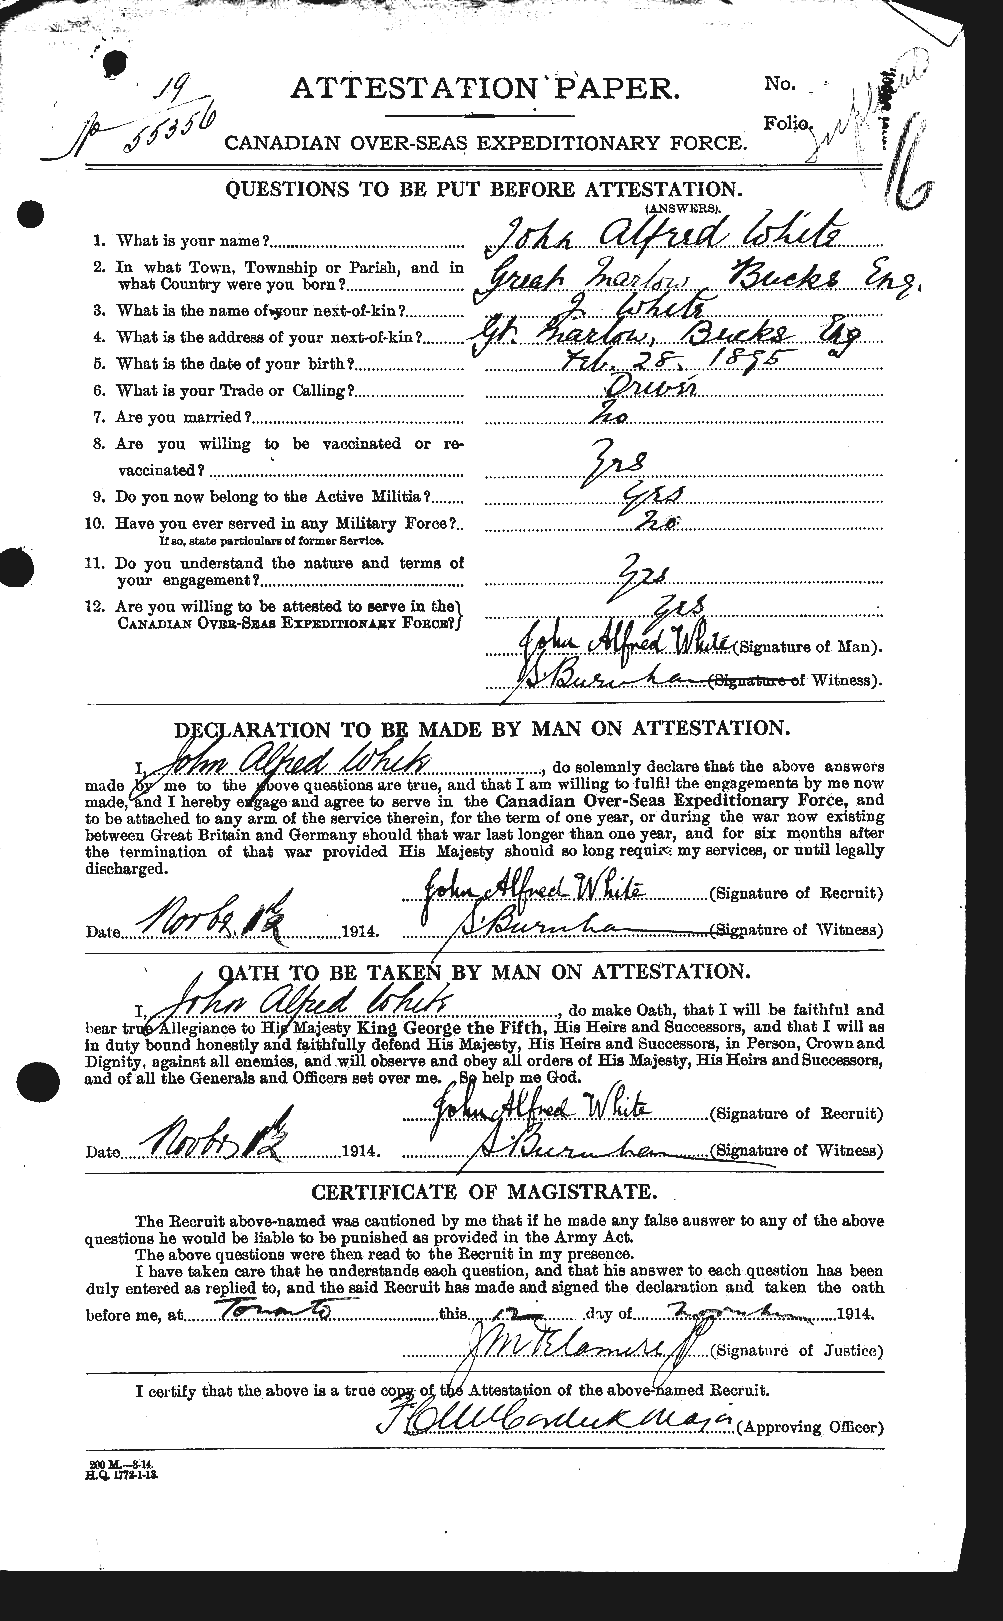 Personnel Records of the First World War - CEF 671536a